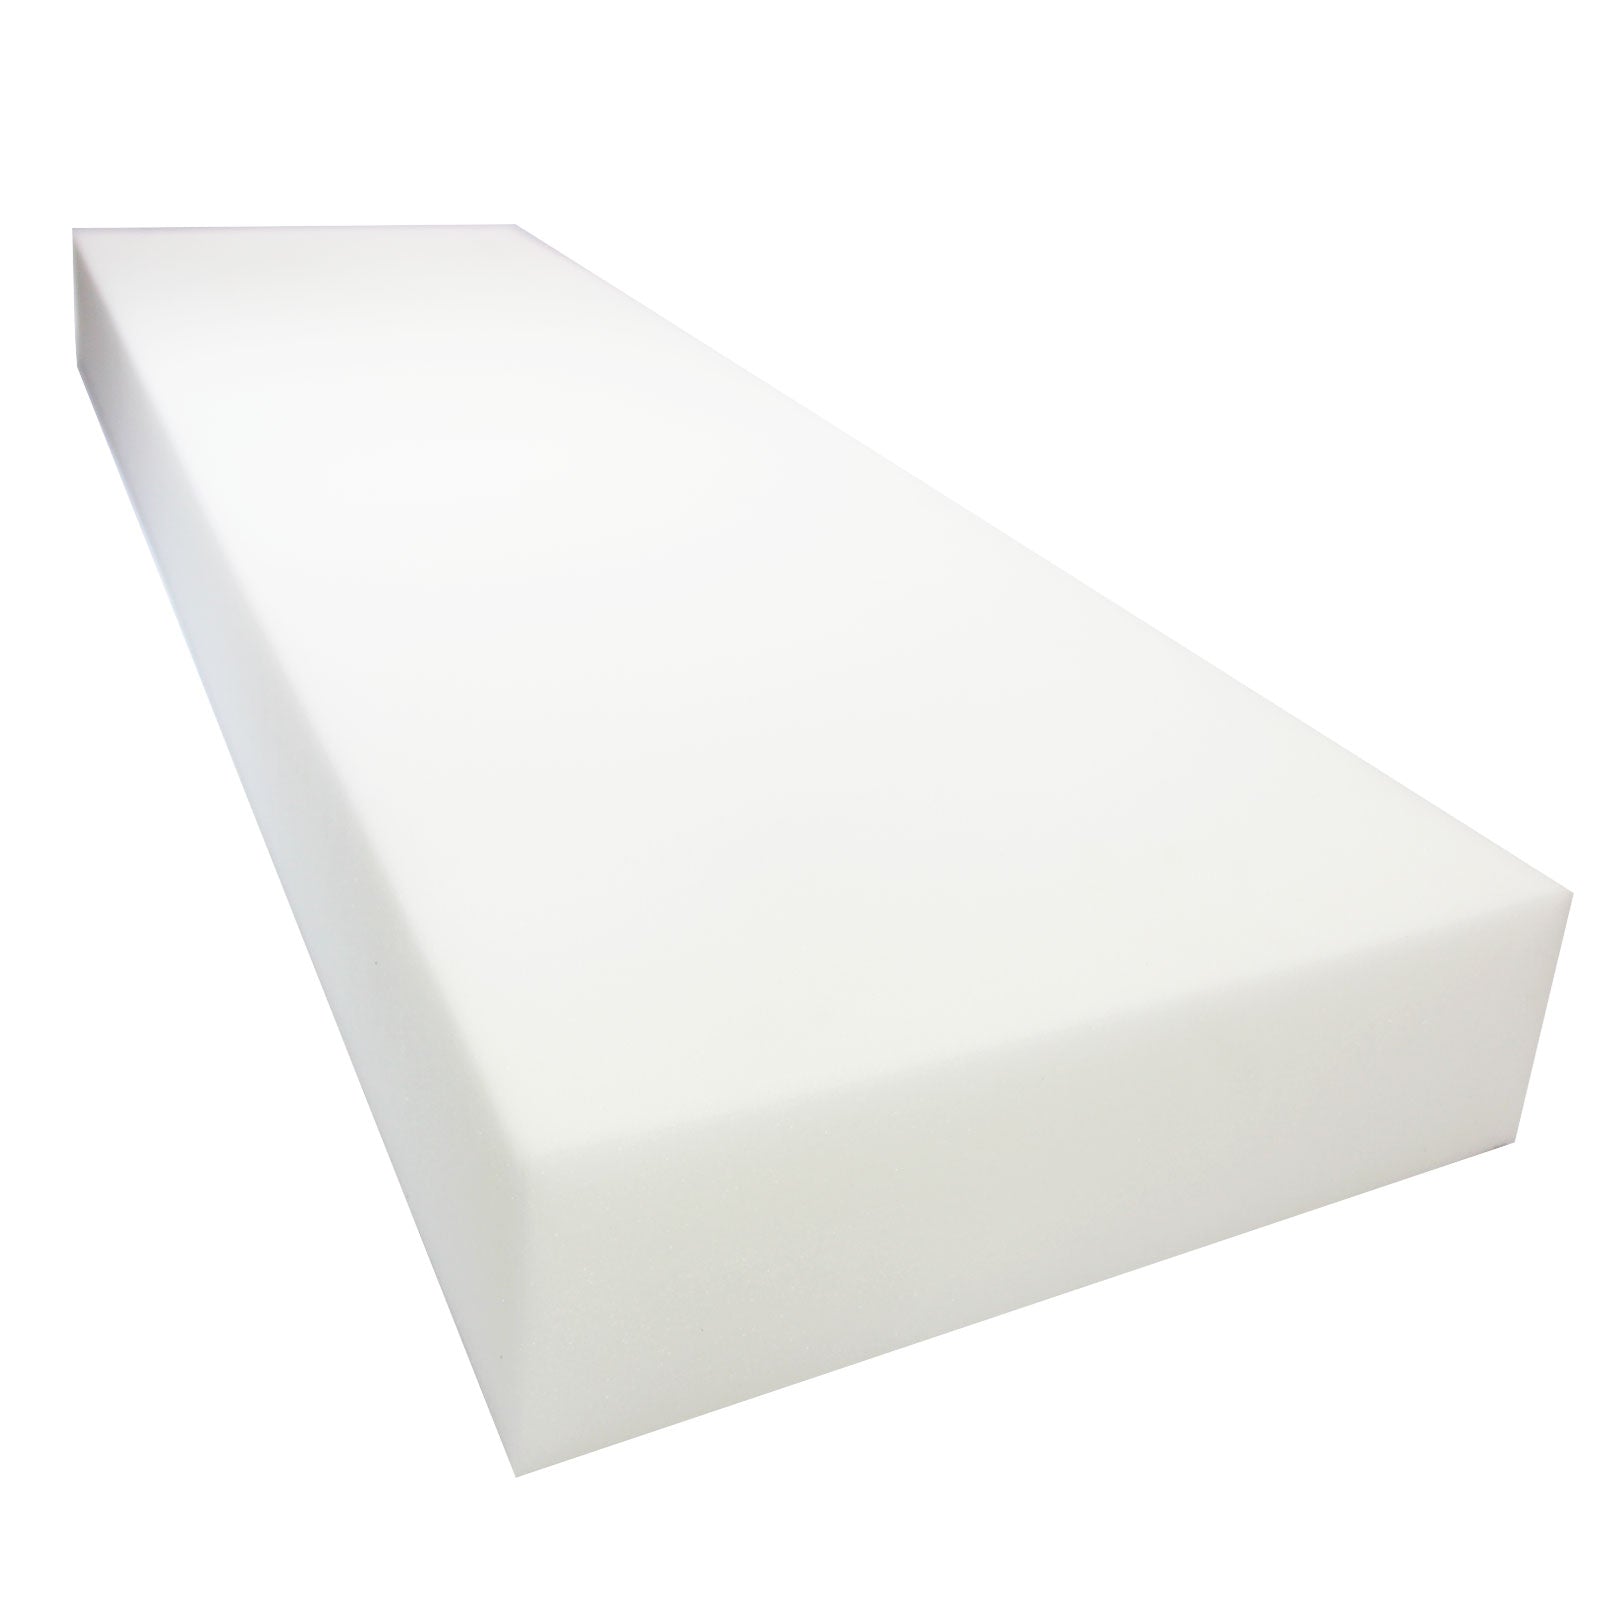 Premium 1/2/3/4 Thick Upholstery Foam,High Density 45D Sofa Cushion  Replacement Padding,Memory Foam Dog Bed Mattress Expanded Padding Sheet